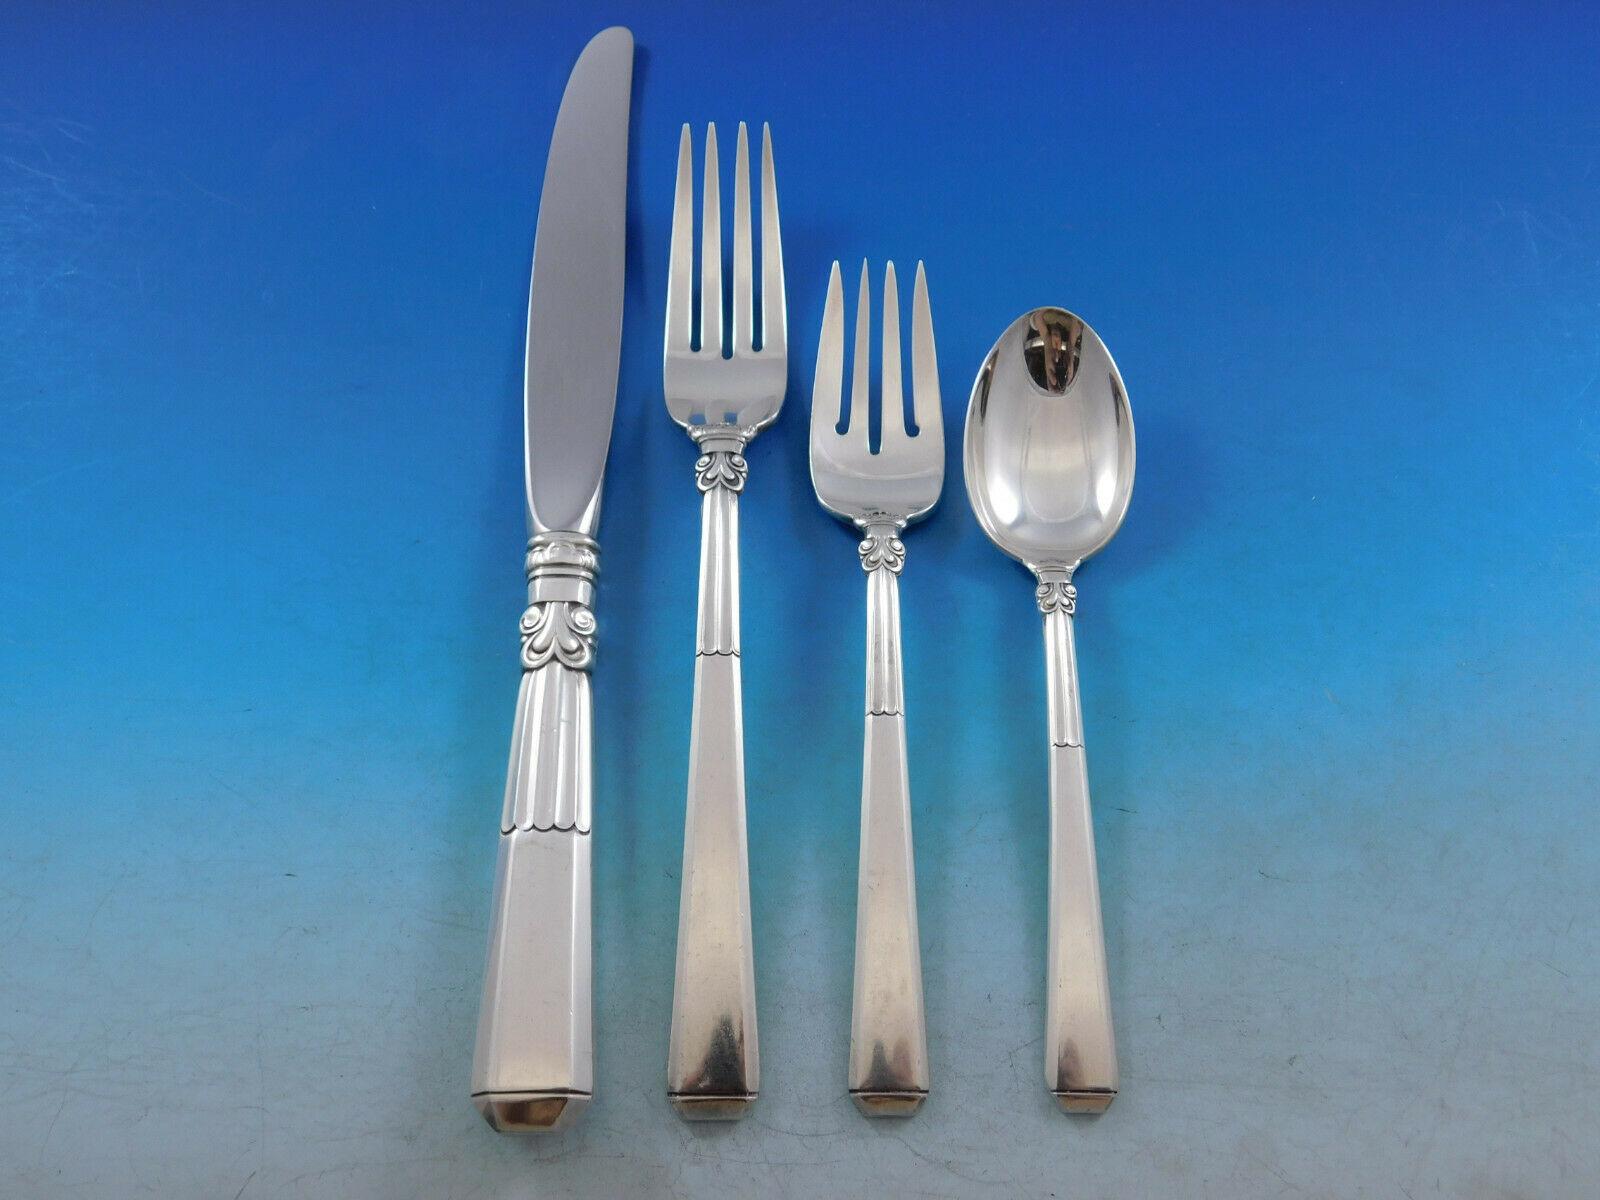 Scarce dinner size epic by Gorham, circa 1941, sterling silver flatware set, 65 pieces. This set includes:

12 dinner knives, 9 1/2